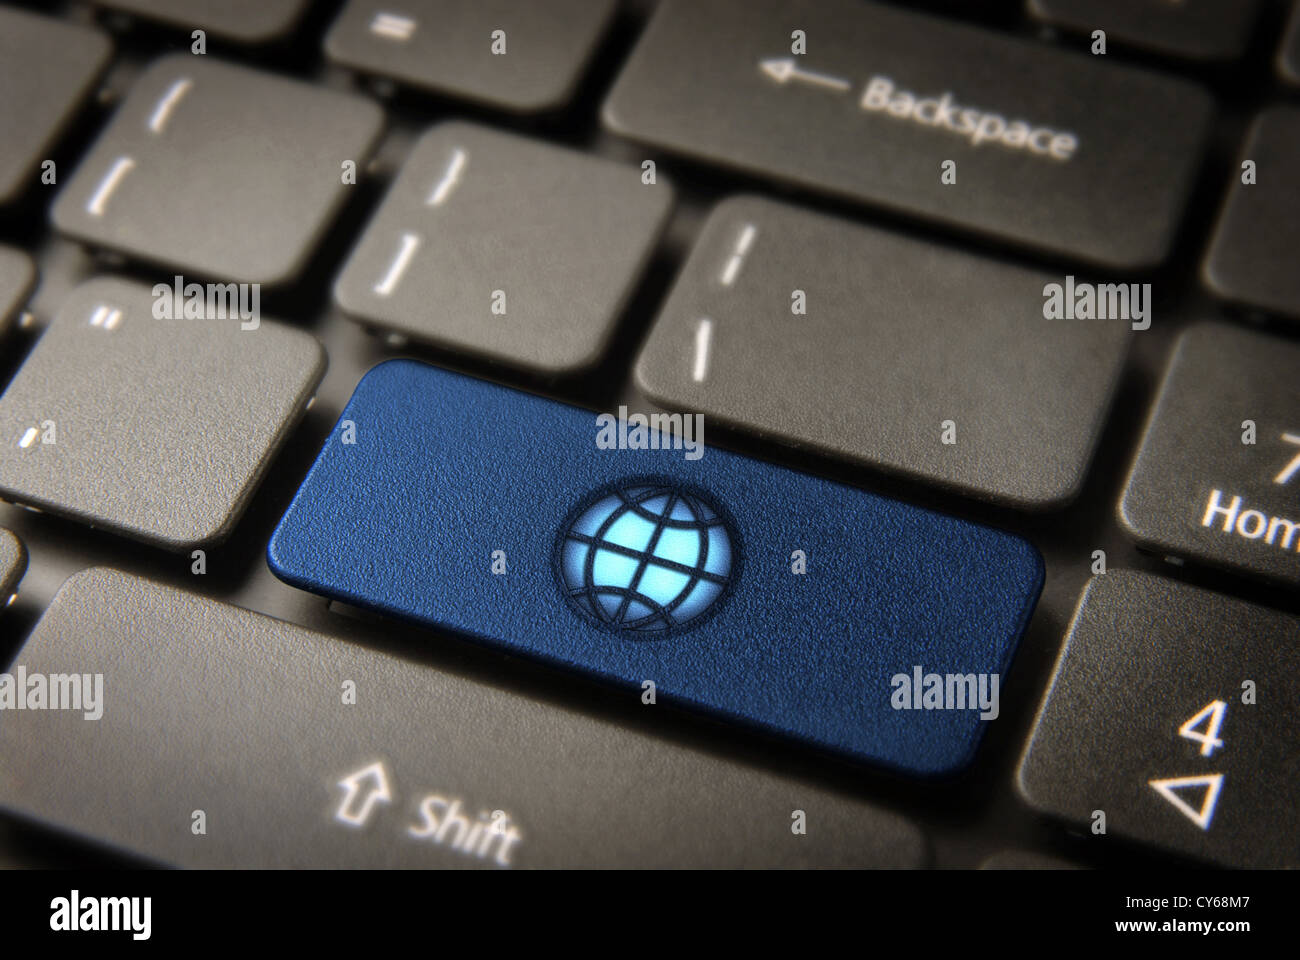 Global internet business key with Globe map icon on laptop keyboard. Included clipping path, so you can easily edit it. Stock Photo